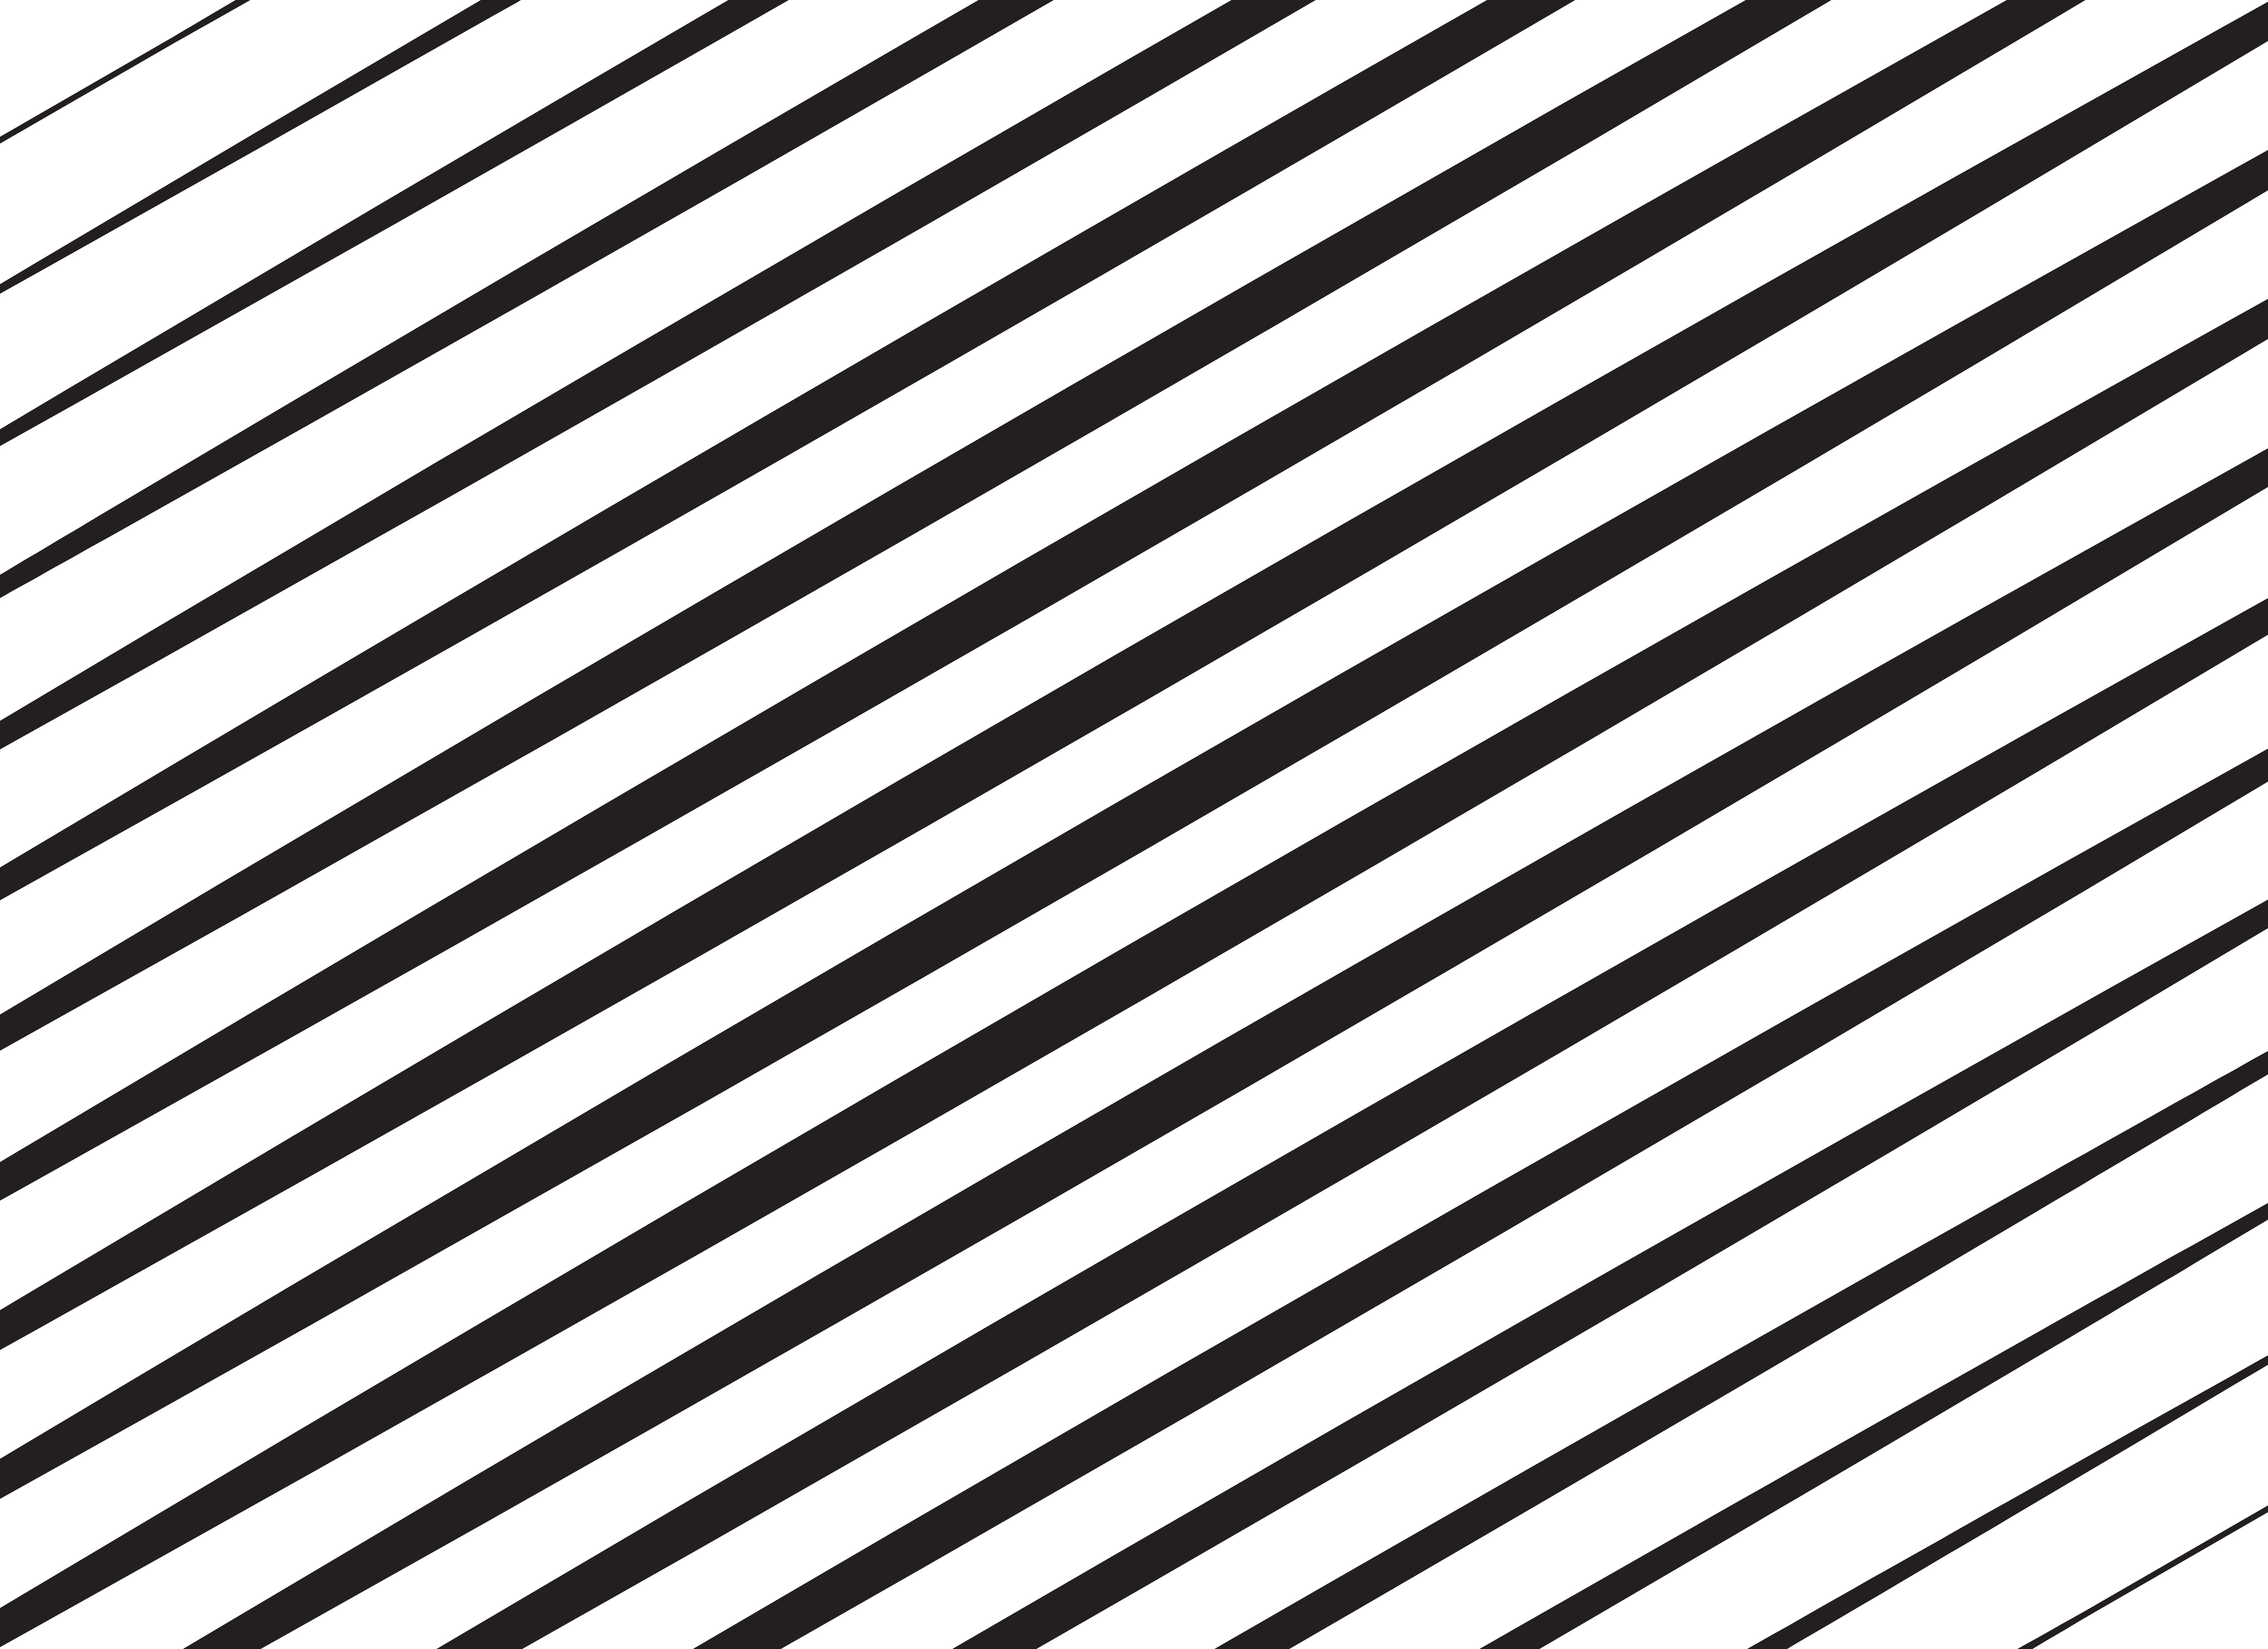 abstract diagonal lines pattern background - Download Free Vector Art ...
 Line Pattern Design